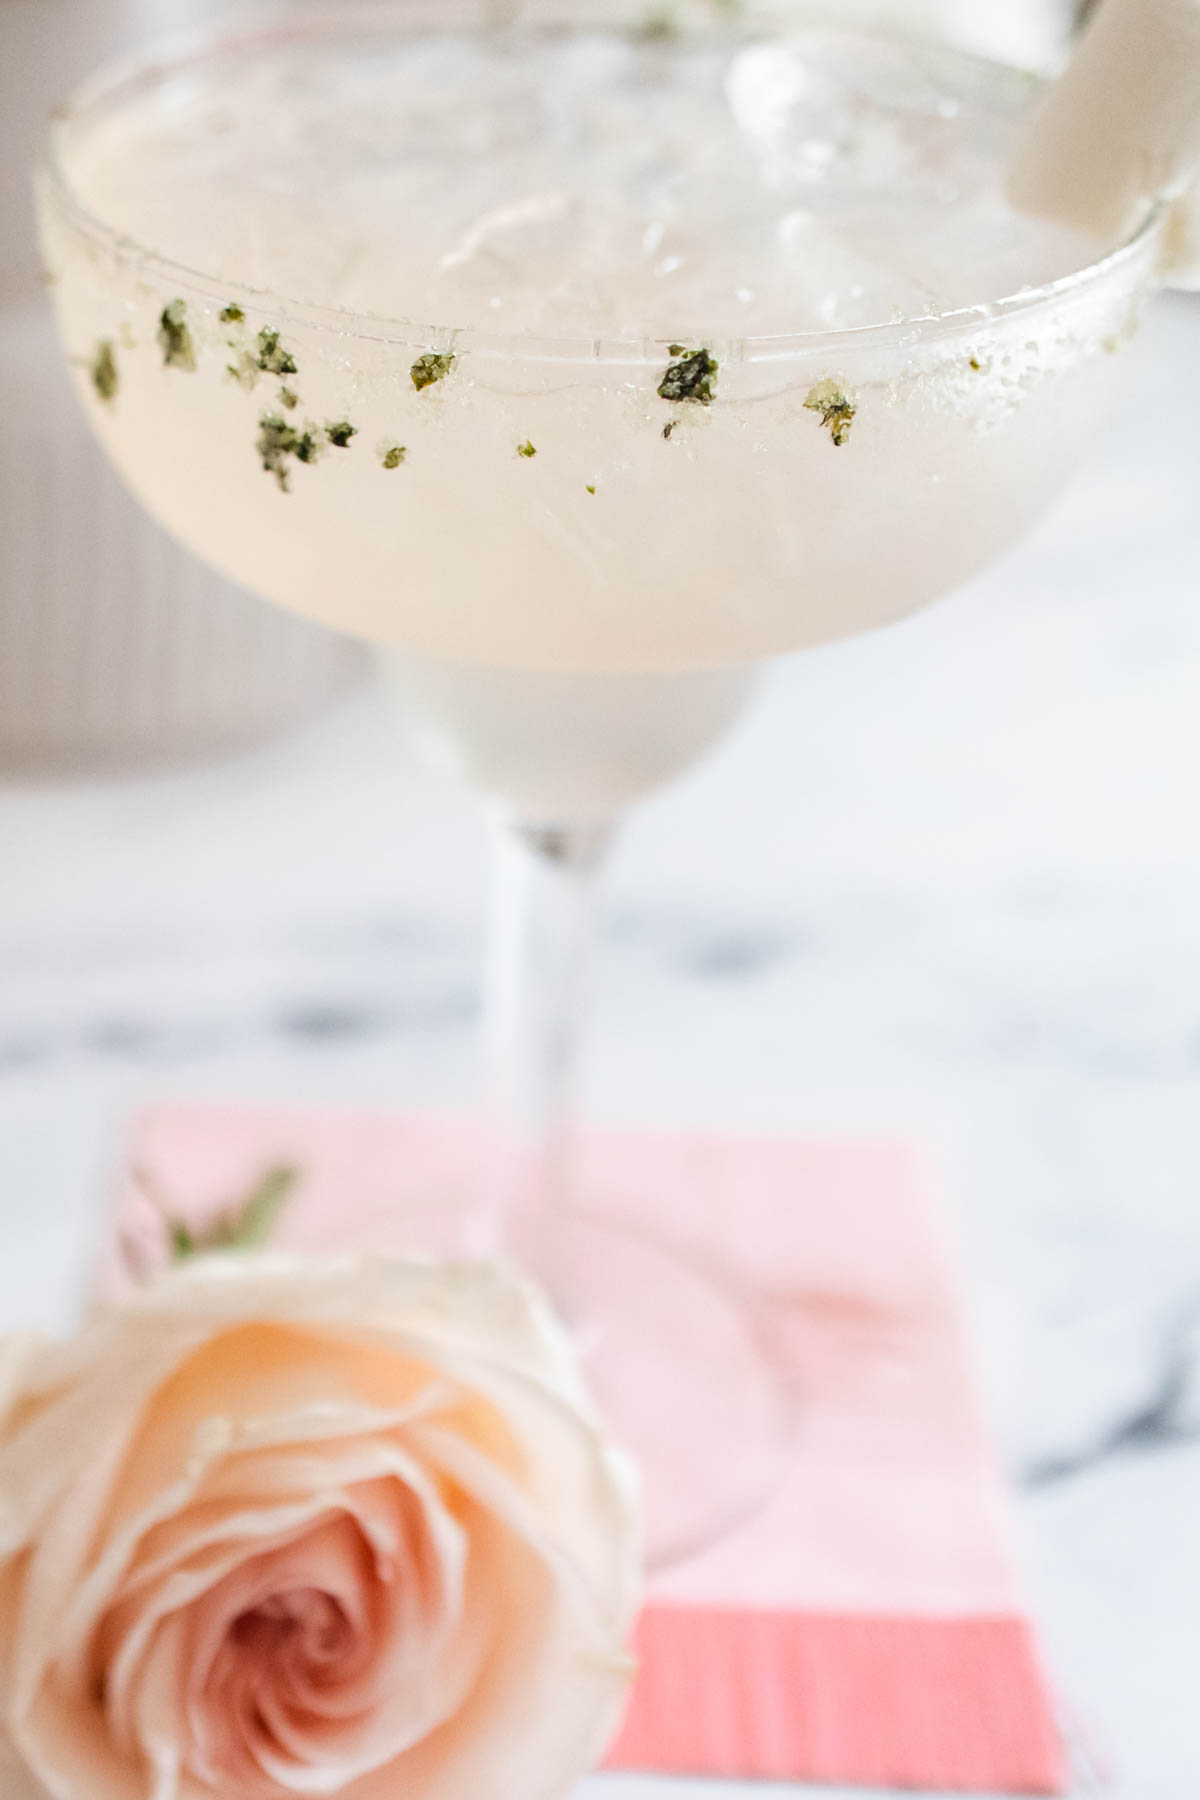 A margarita glass with a sugar rim with basil on a table next to a flower.